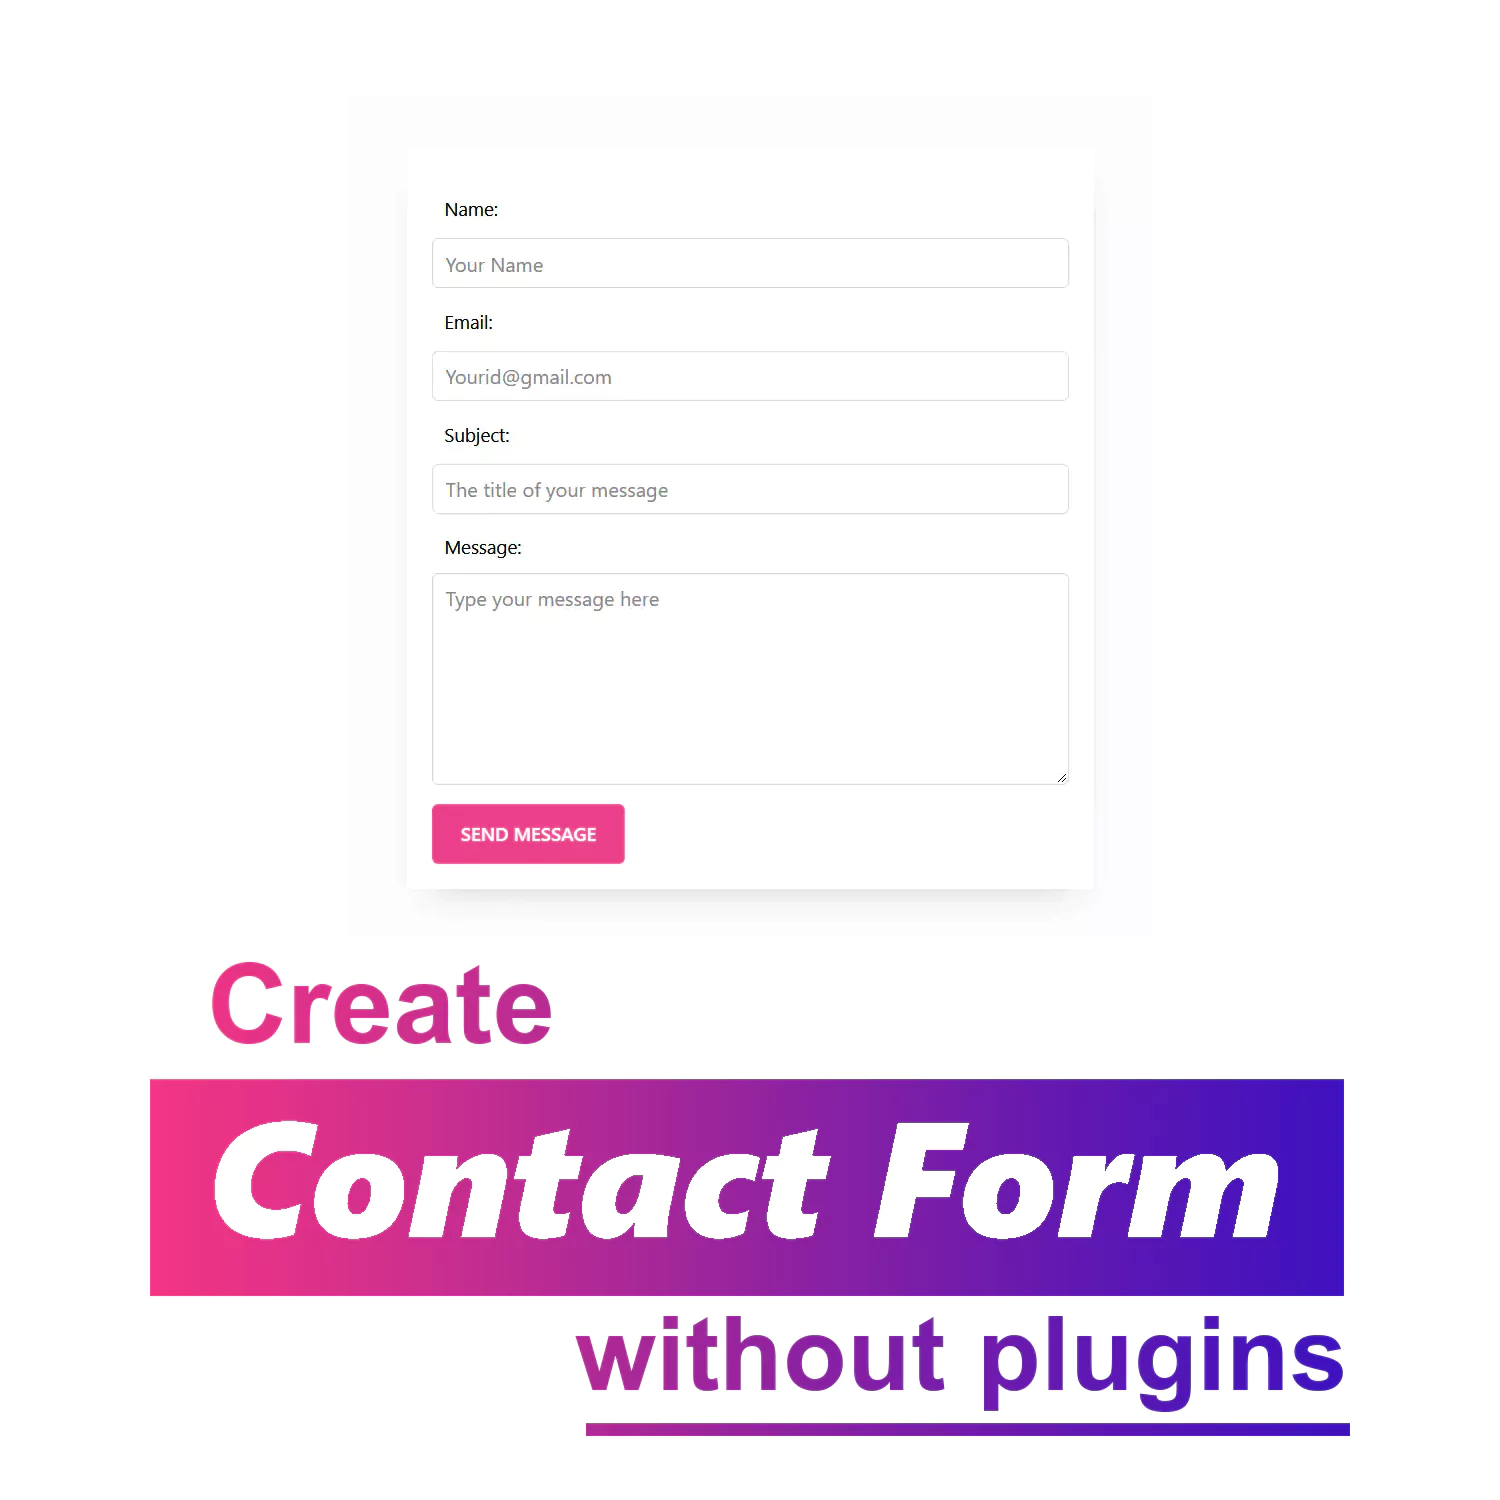 Add Contact Form in WordPress without plugins [free]